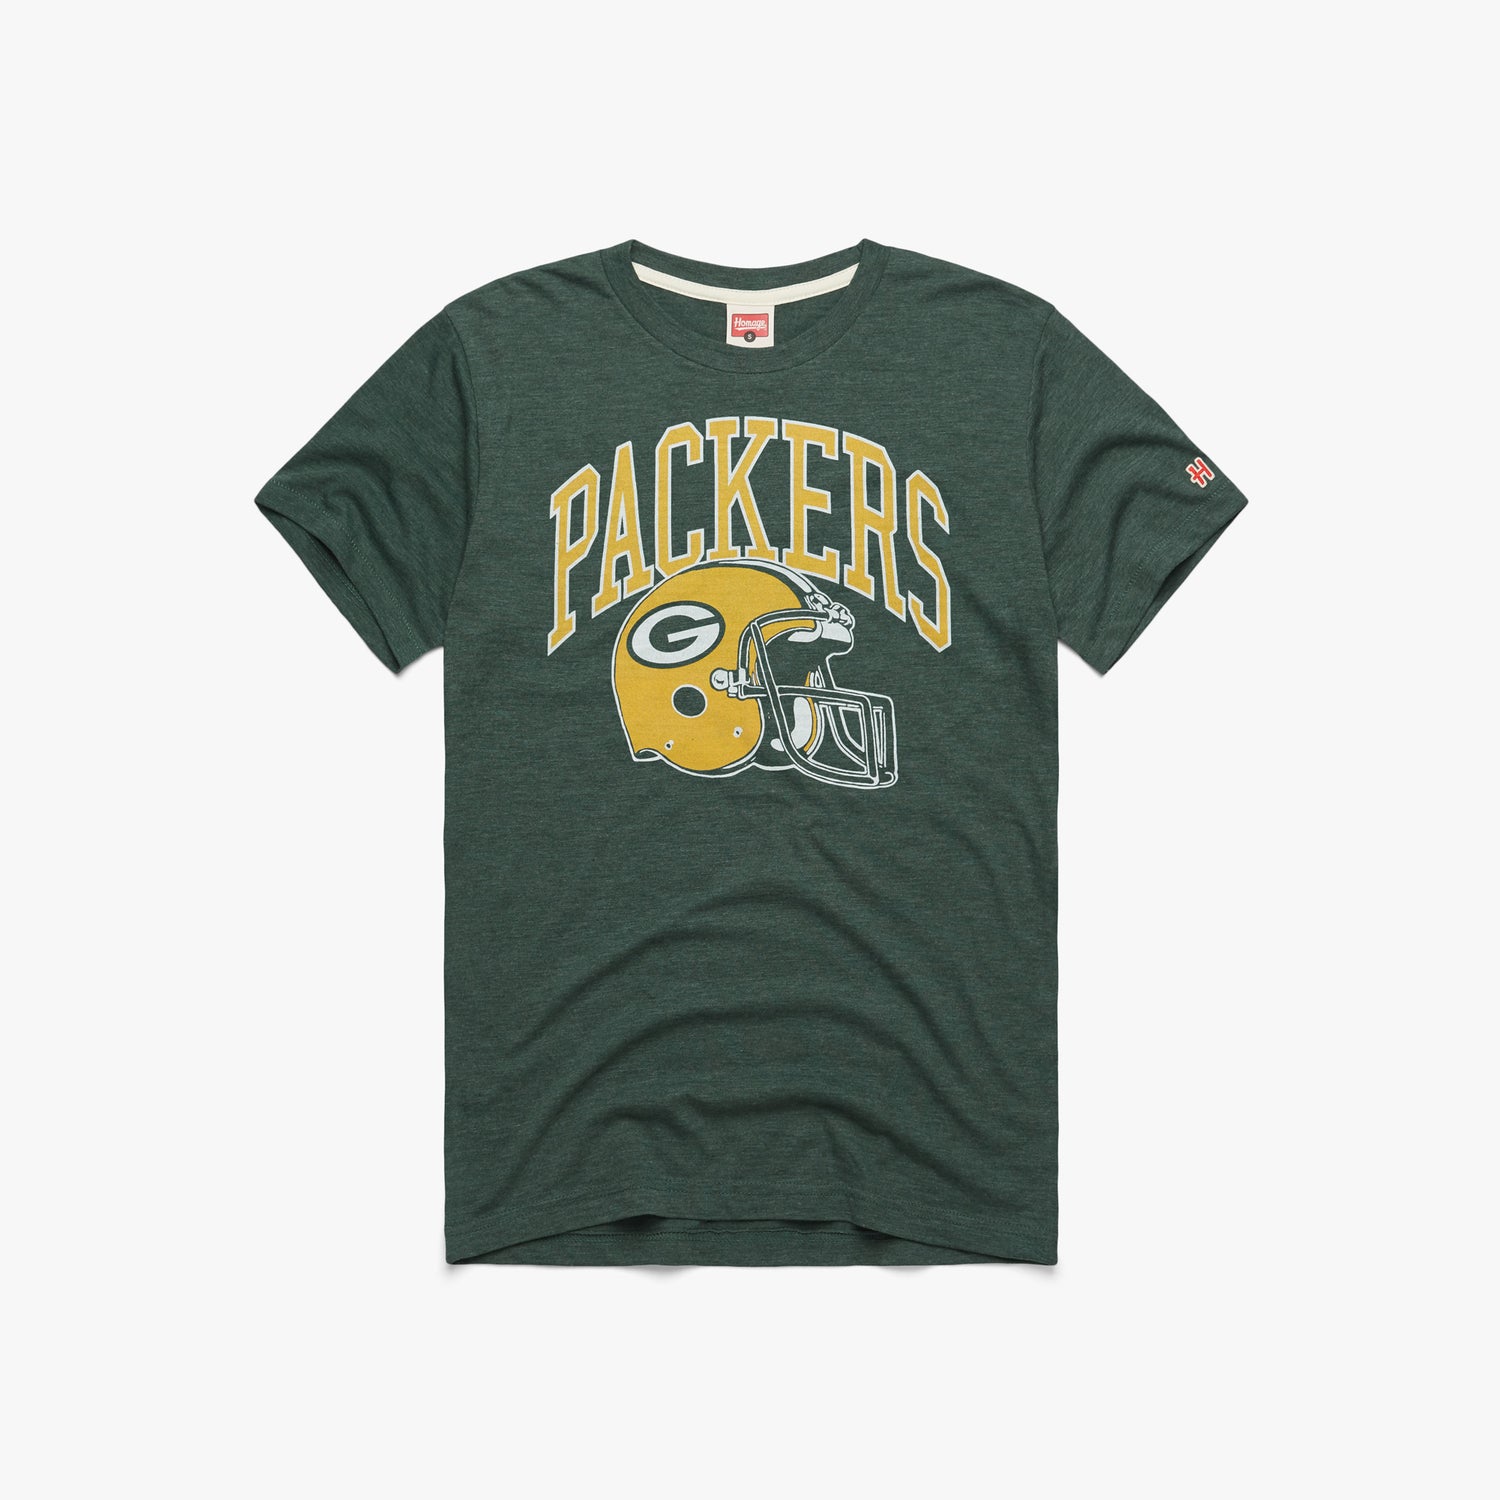 G is for gone: Packers gear a hot seller on Bears turf